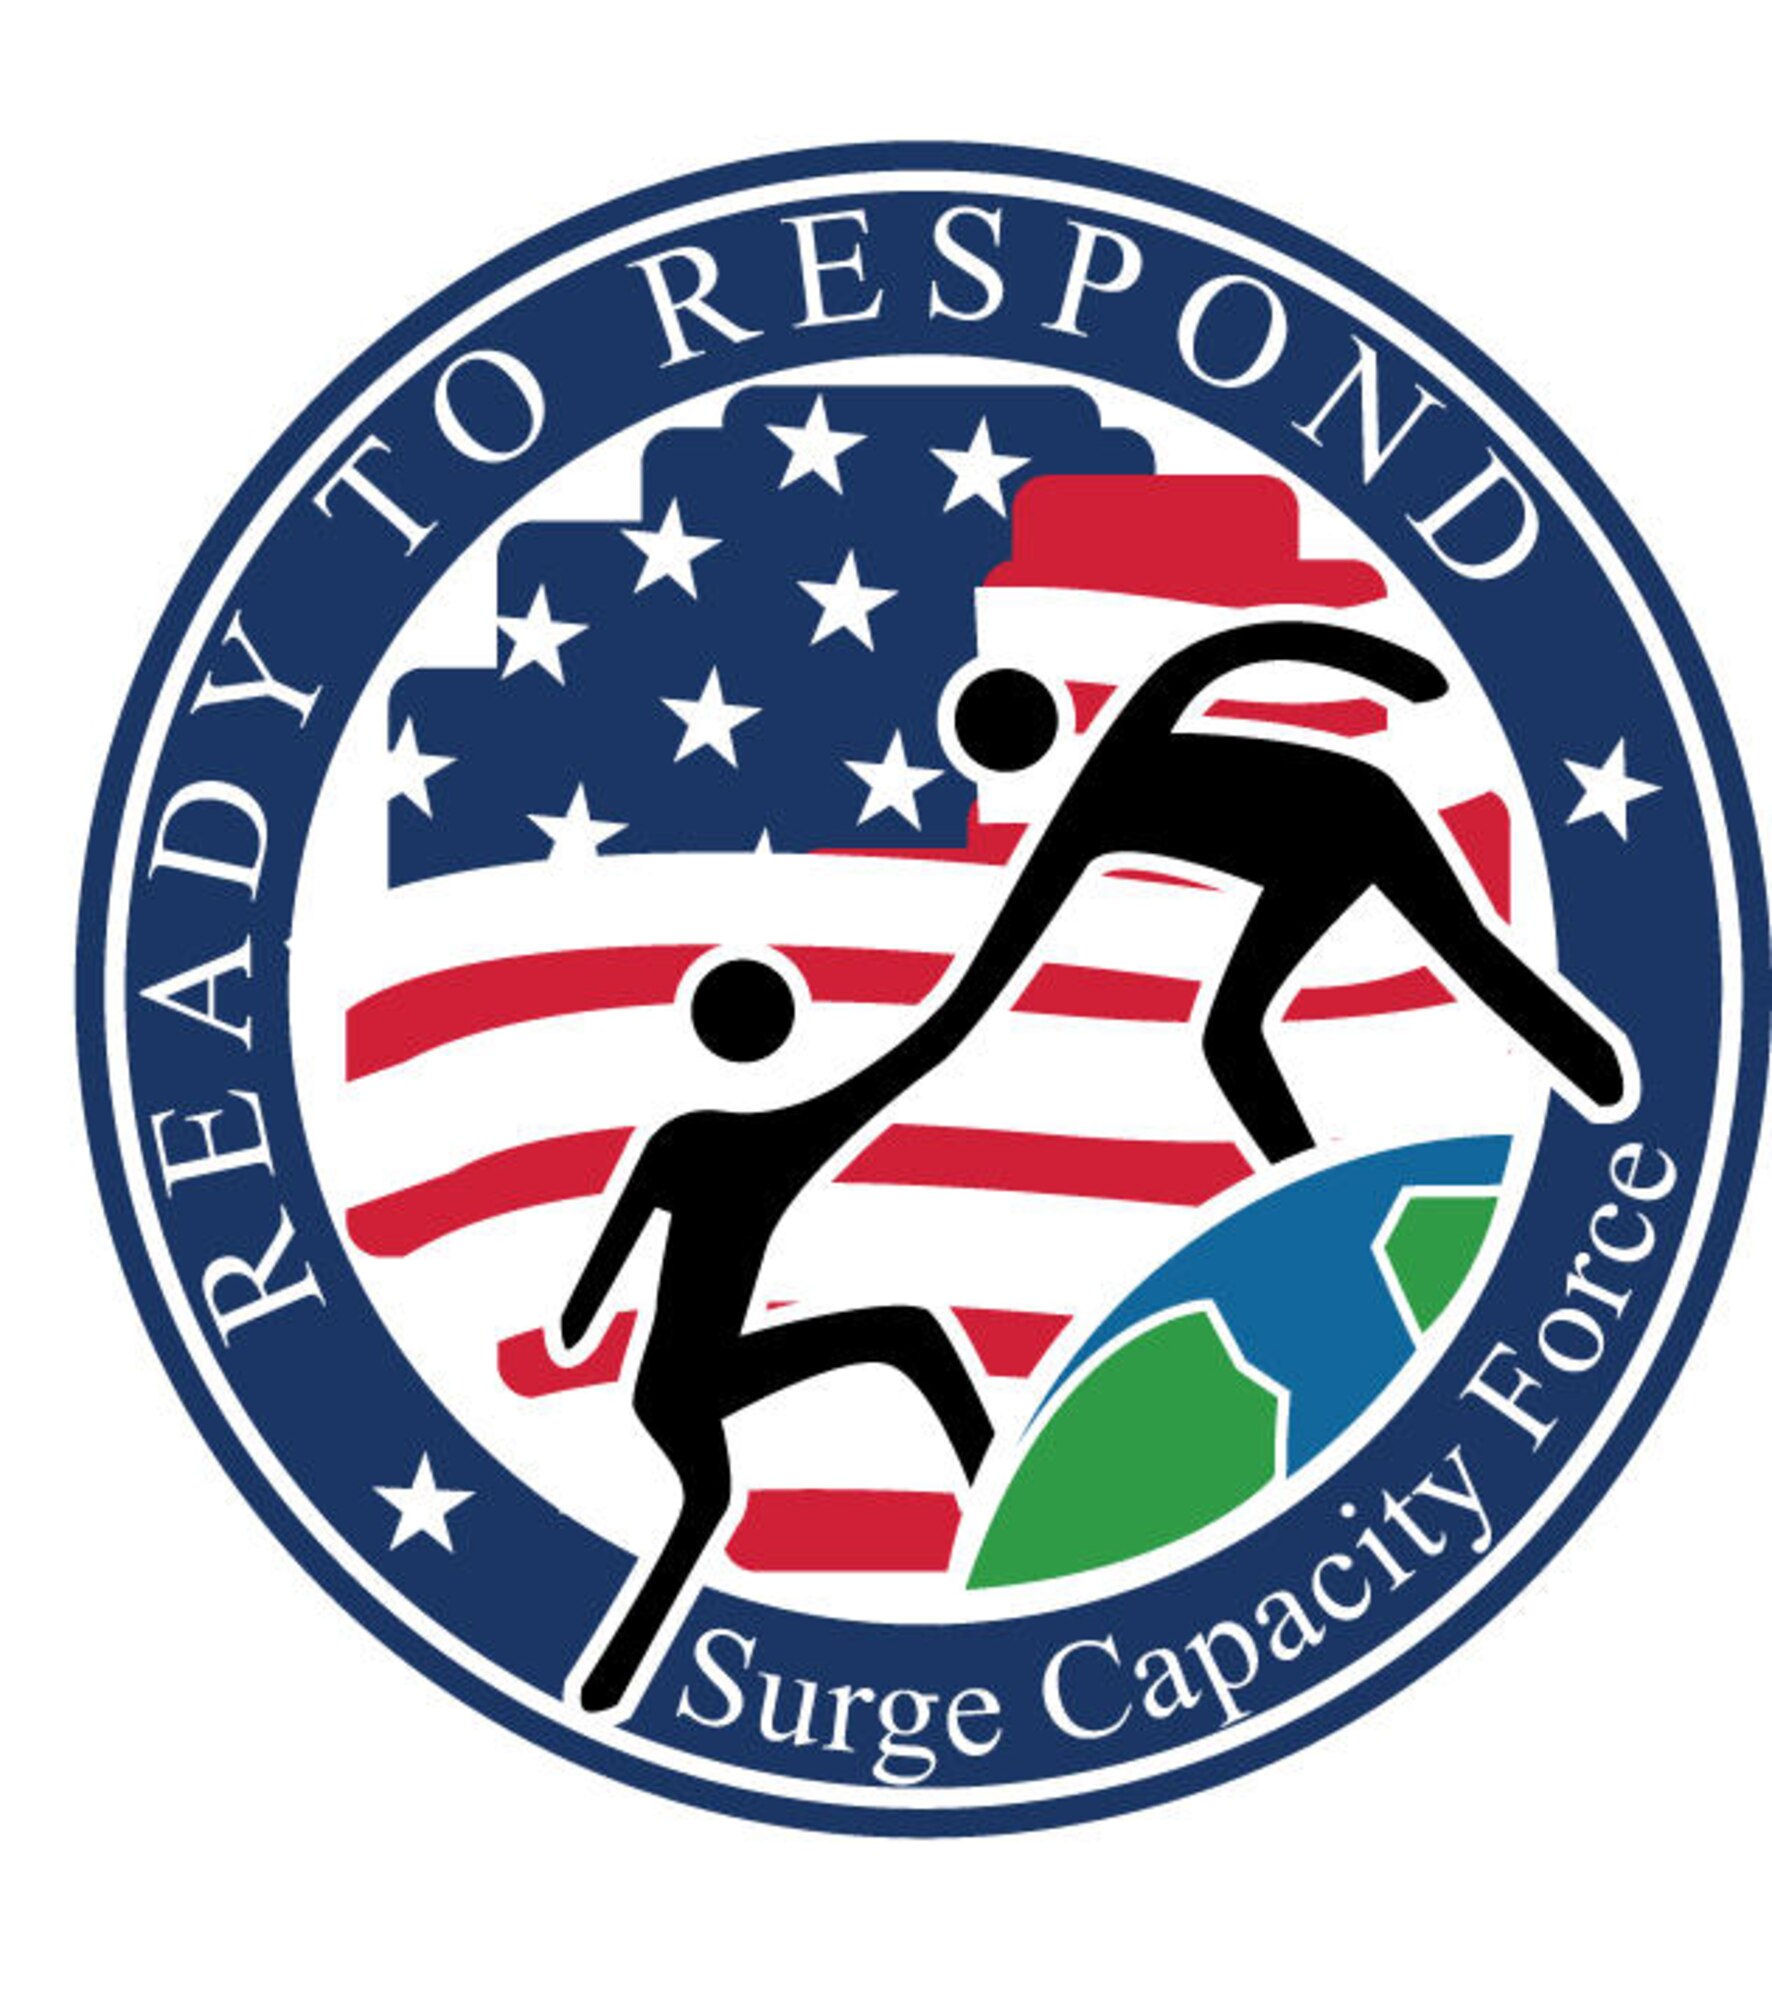 In the aftermath of a catastrophic event, the Department of Homeland Security turns to its Surge Capacity Force, a cadre of federal employee heroes who help affected communities by supporting the Federal Emergency Management Agency’s urgent response and recovery efforts. The SCF is made up of Federal employees from every department or agency in the federal government. (Courtesy graphic)